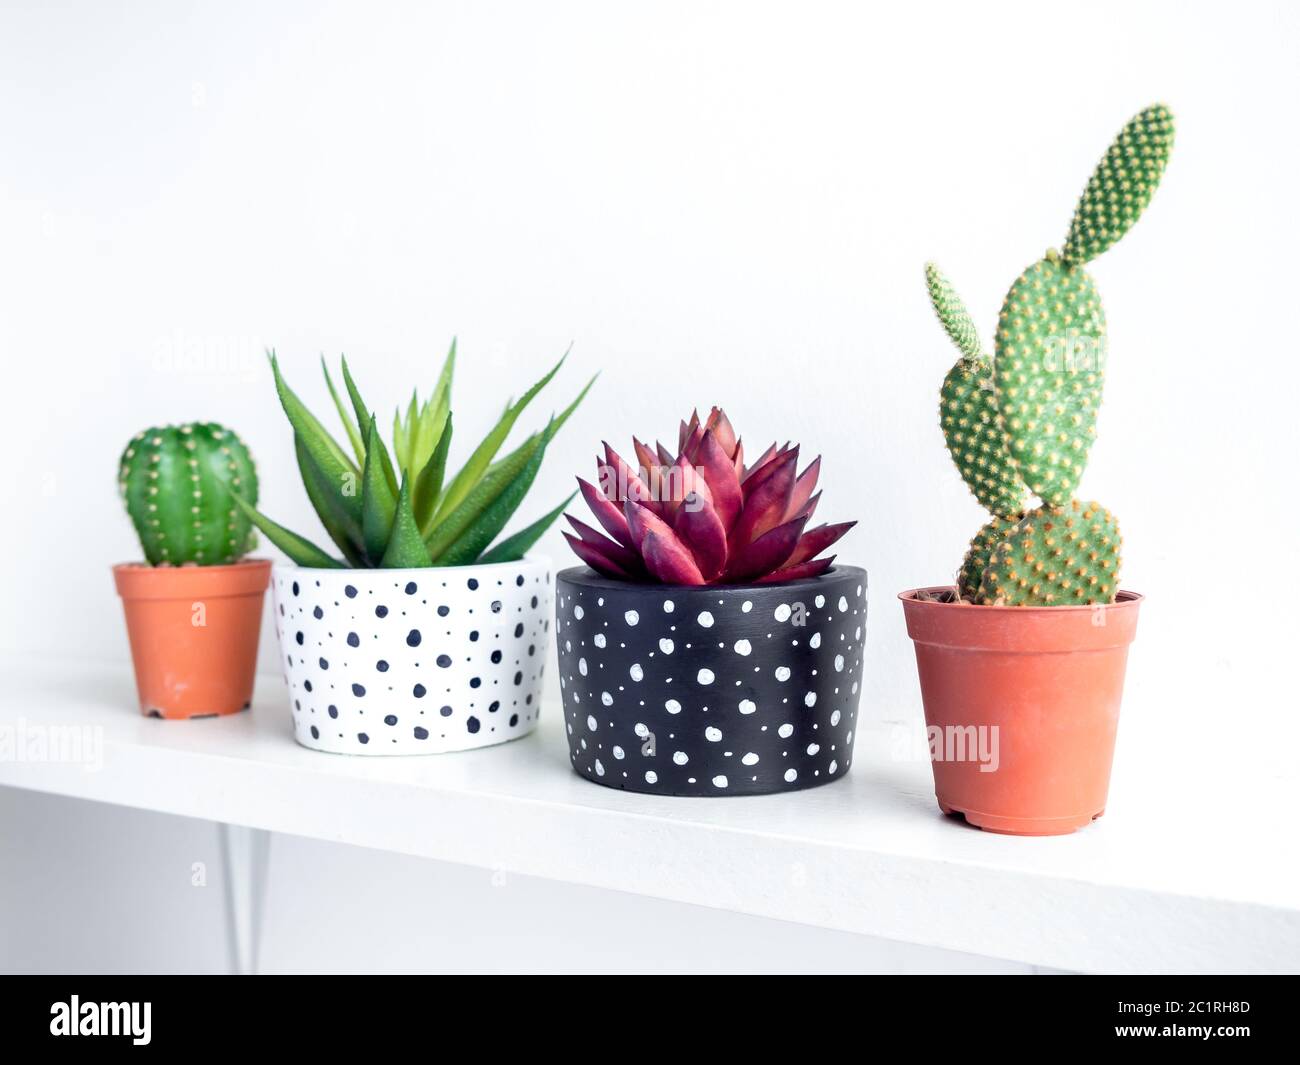 Plants pot. Green and red succulent plants in modern black and white with dots pattern colour painted concrete planters and cactus in plastic pots on Stock Photo